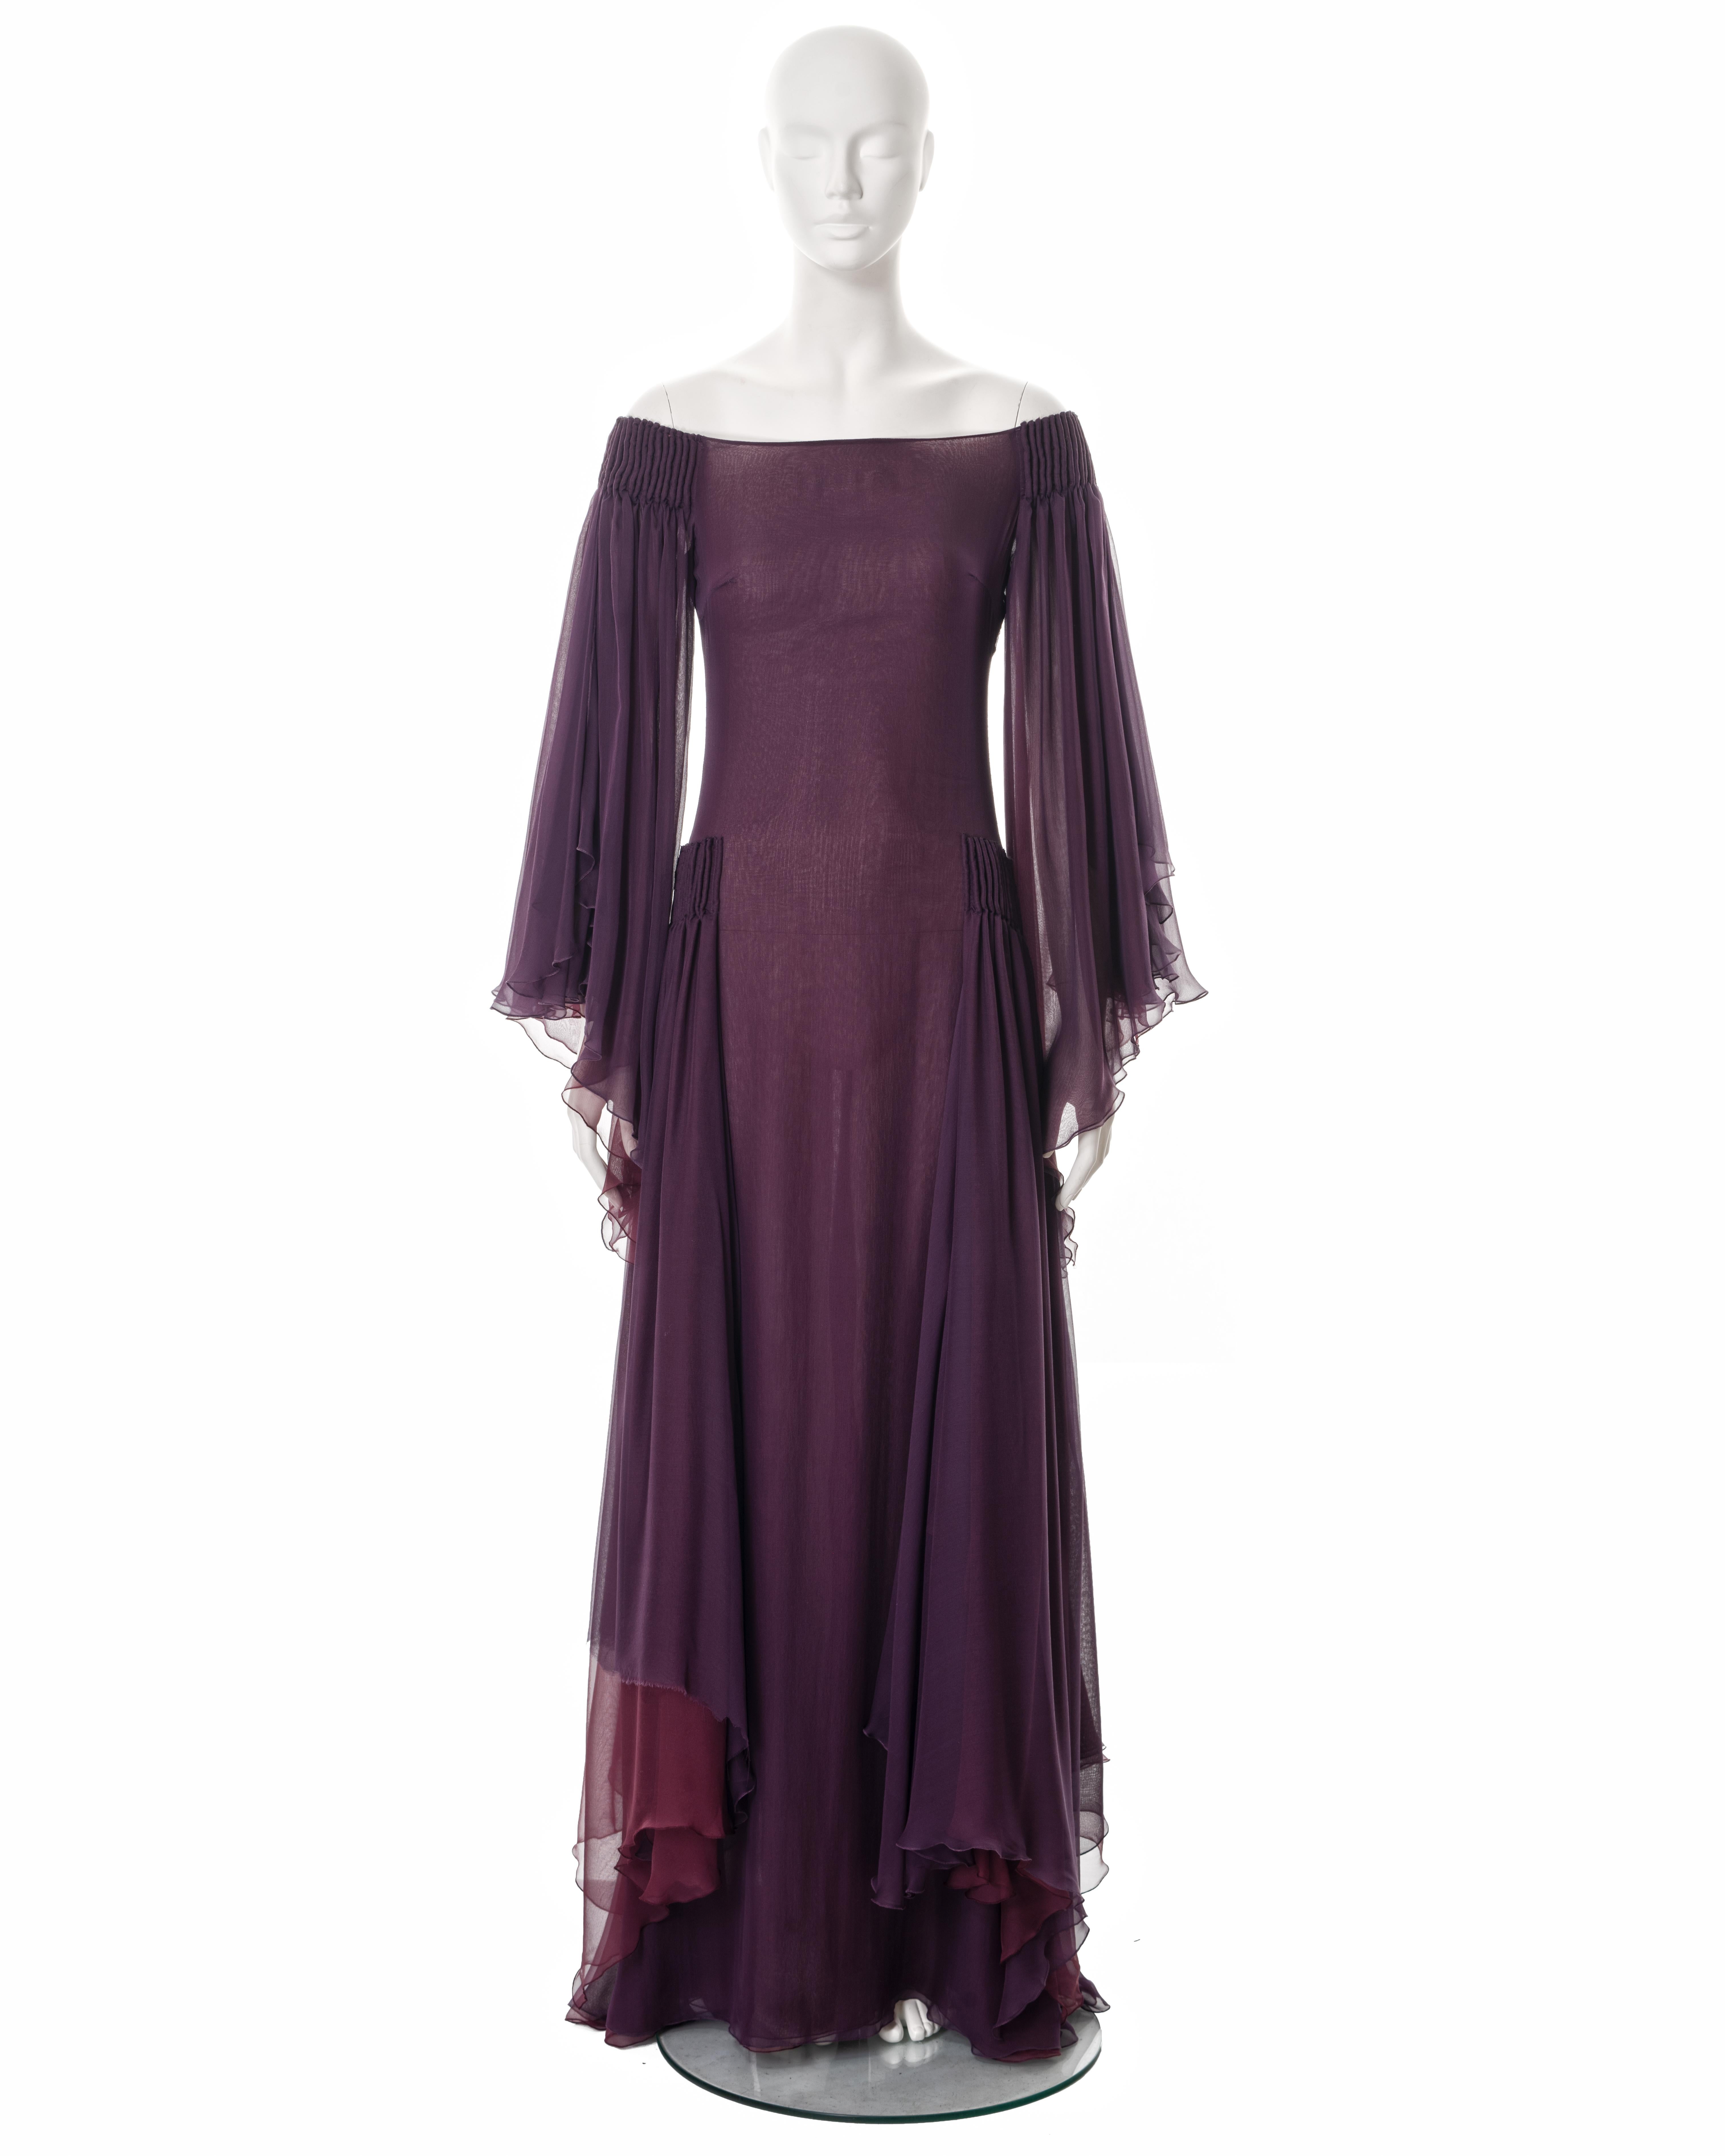 ▪ Valentino evening dress
▪ Sold by One of a Kind Archive
▪ Fall-Winter 2002
▪ Constructed from two layers of silk in plum and wine 
▪ Off-shoulder neckline 
▪ Inverted pleats at the shoulder and hips
▪ Angel sleeves 
▪ Floor length skirt 
▪ Size US